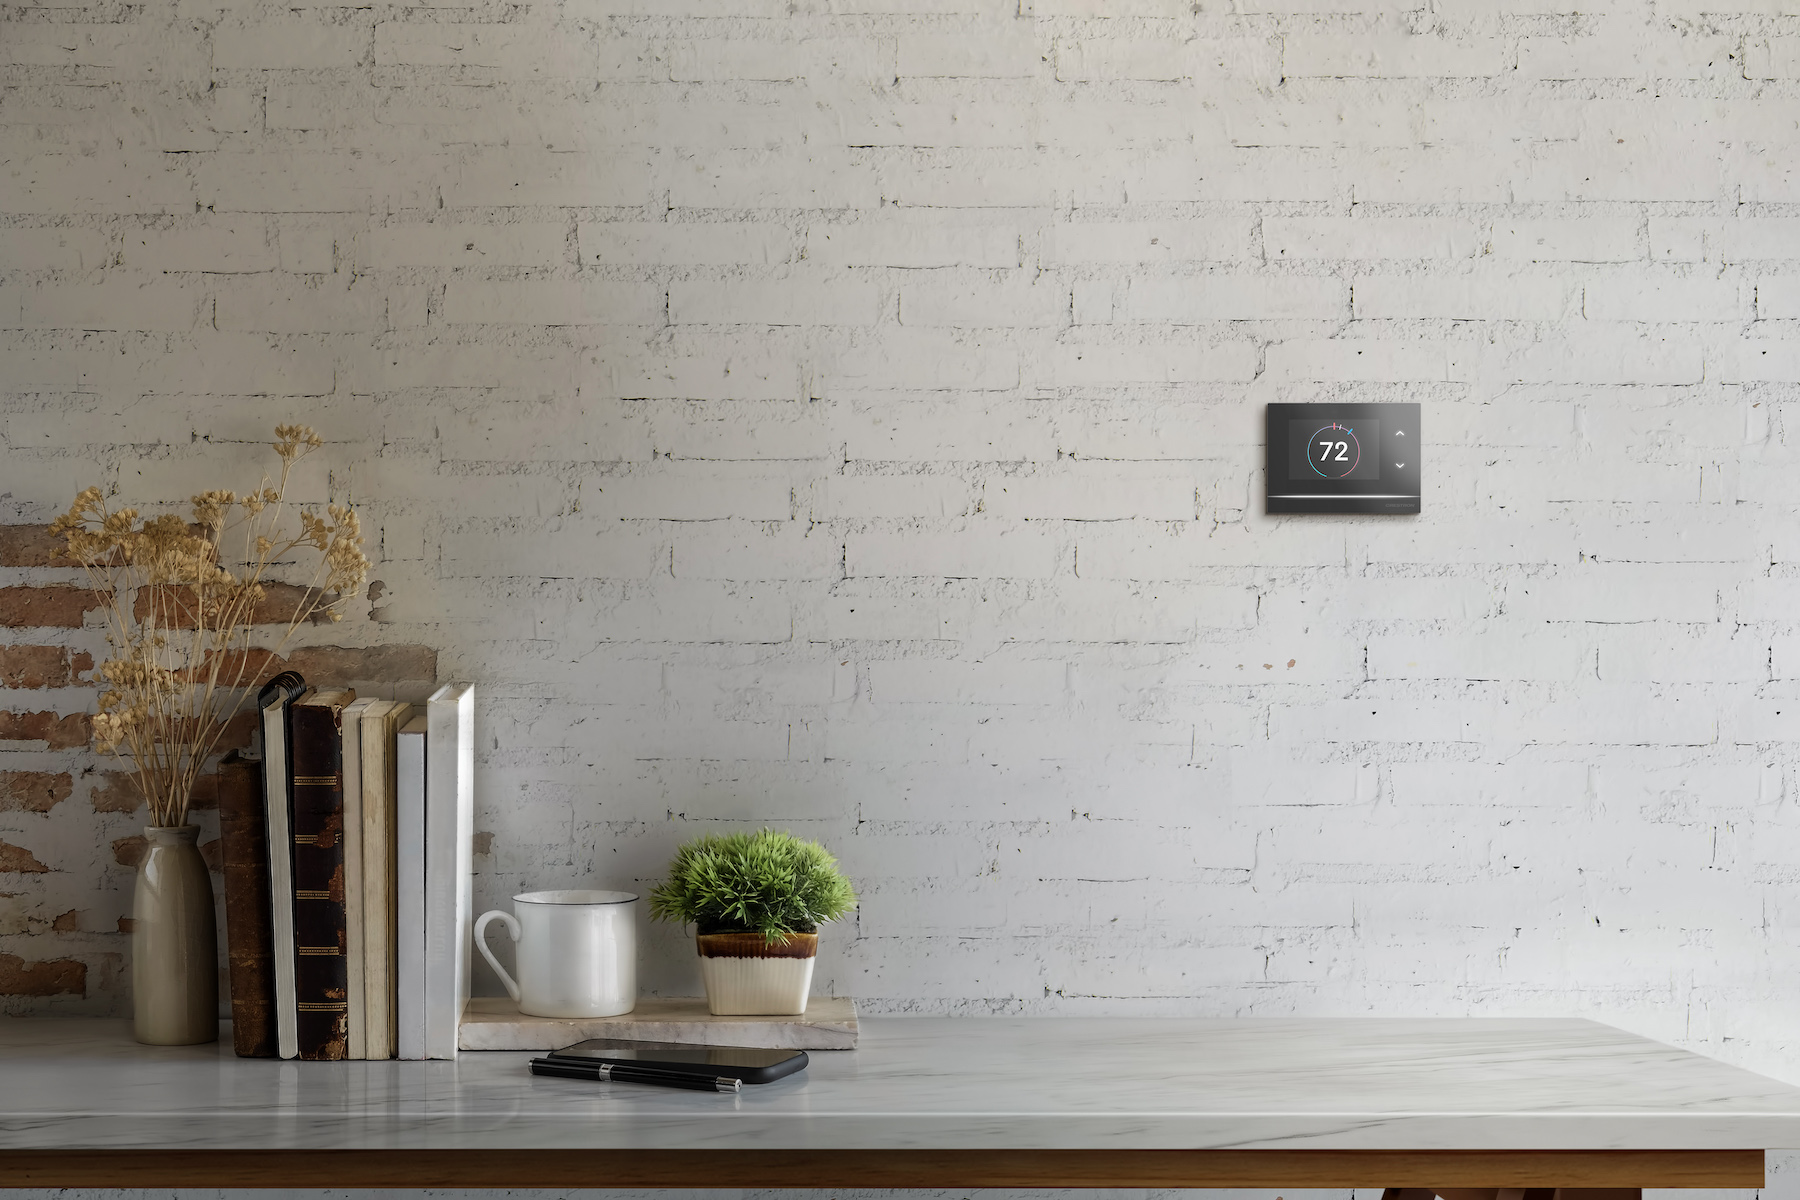 Crestron releases touch screen smart thermostat, with two-wire installation.